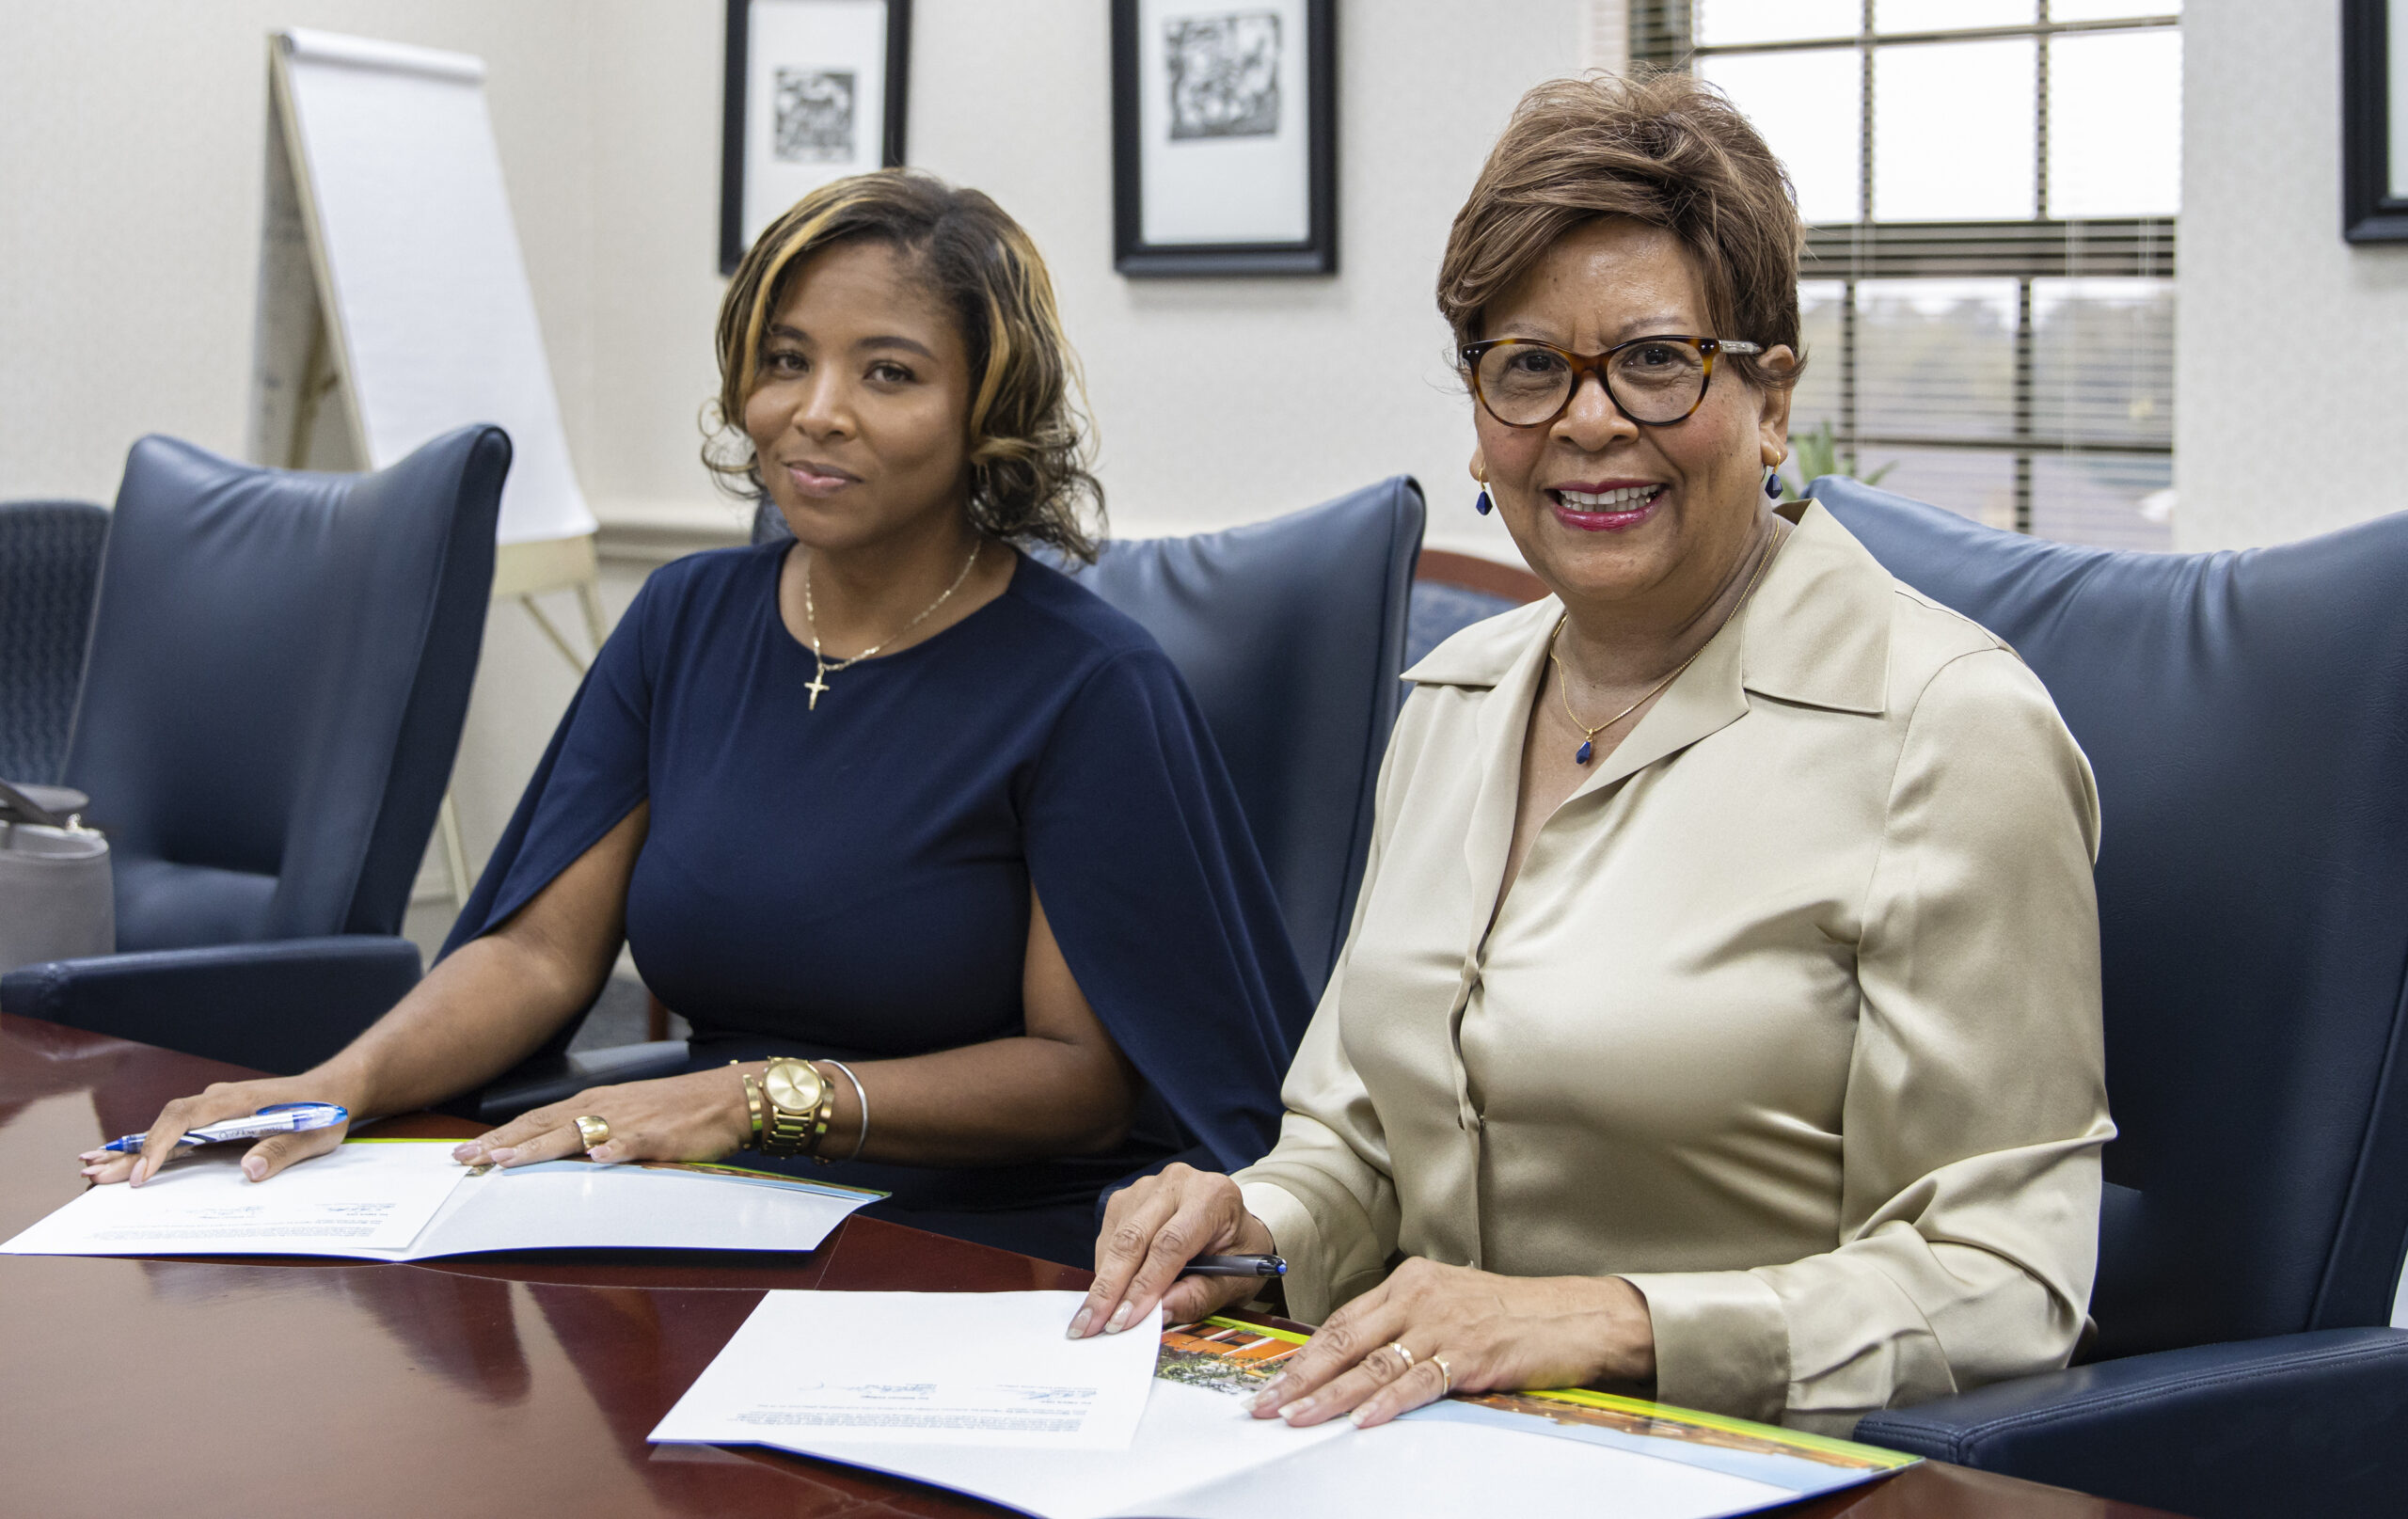 Two Black women sign a contract